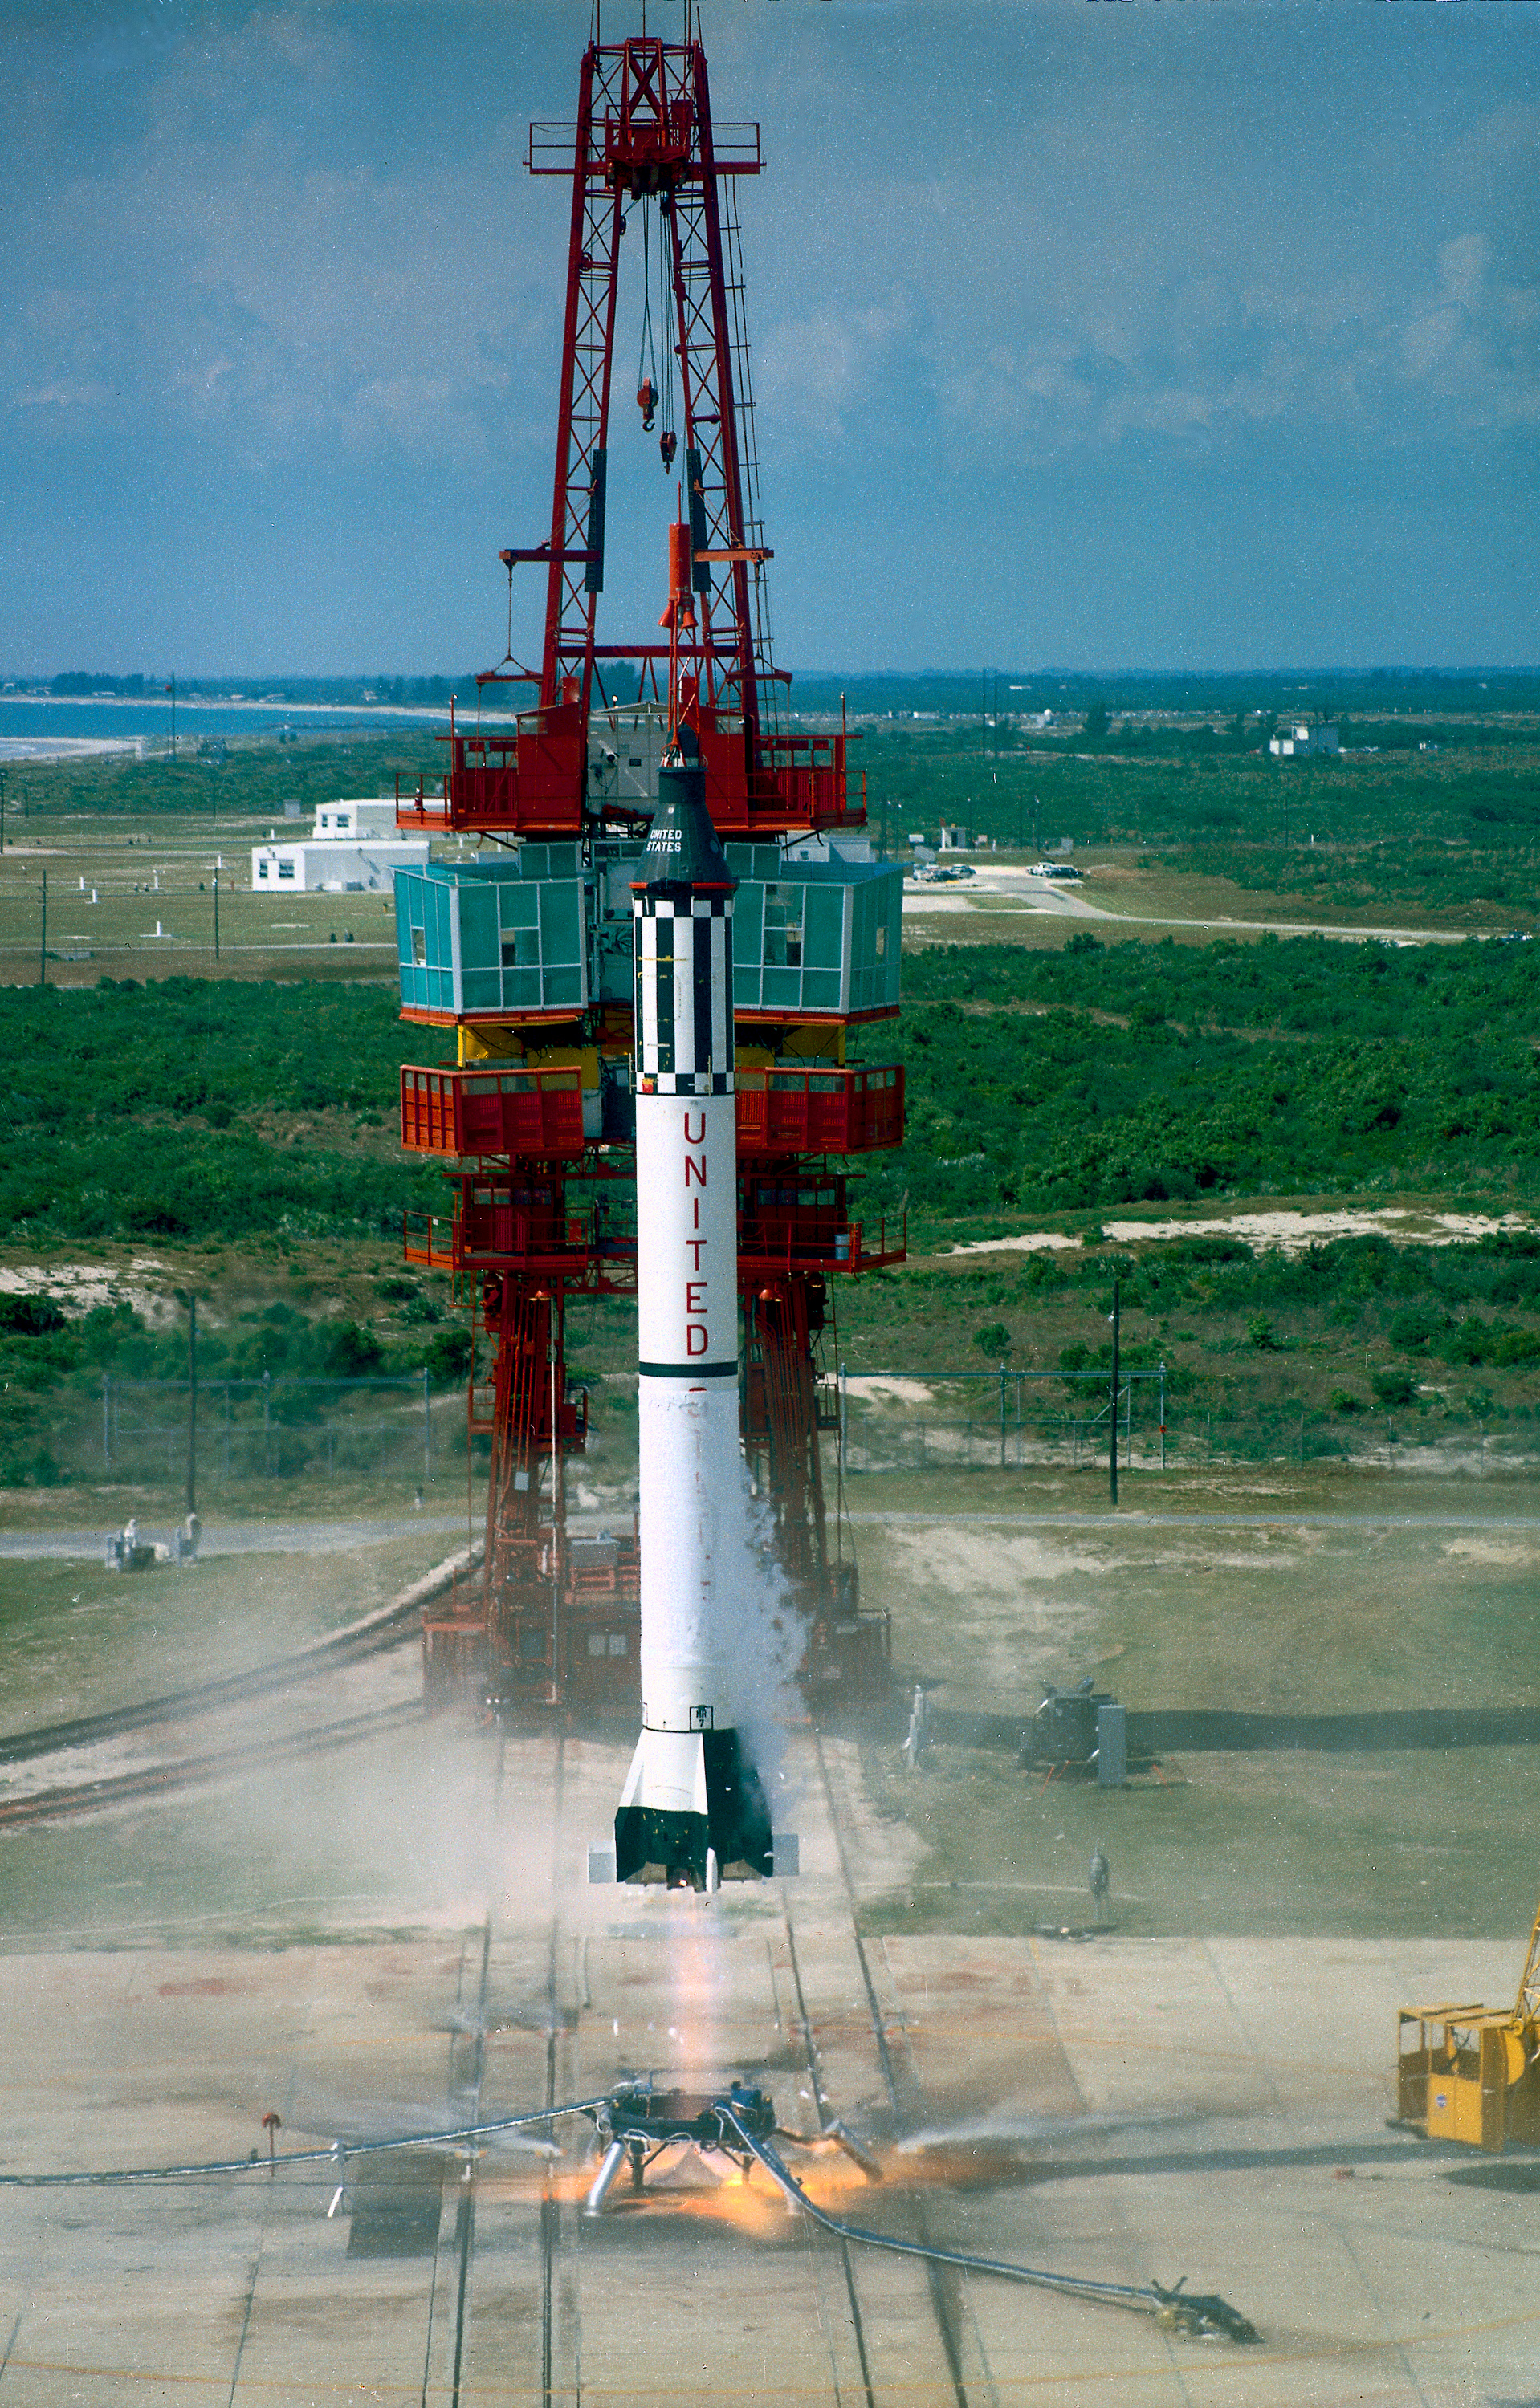 astronaut-alan-shepard-lifted-off-in-the-freedom-7-spacecraft.jpg